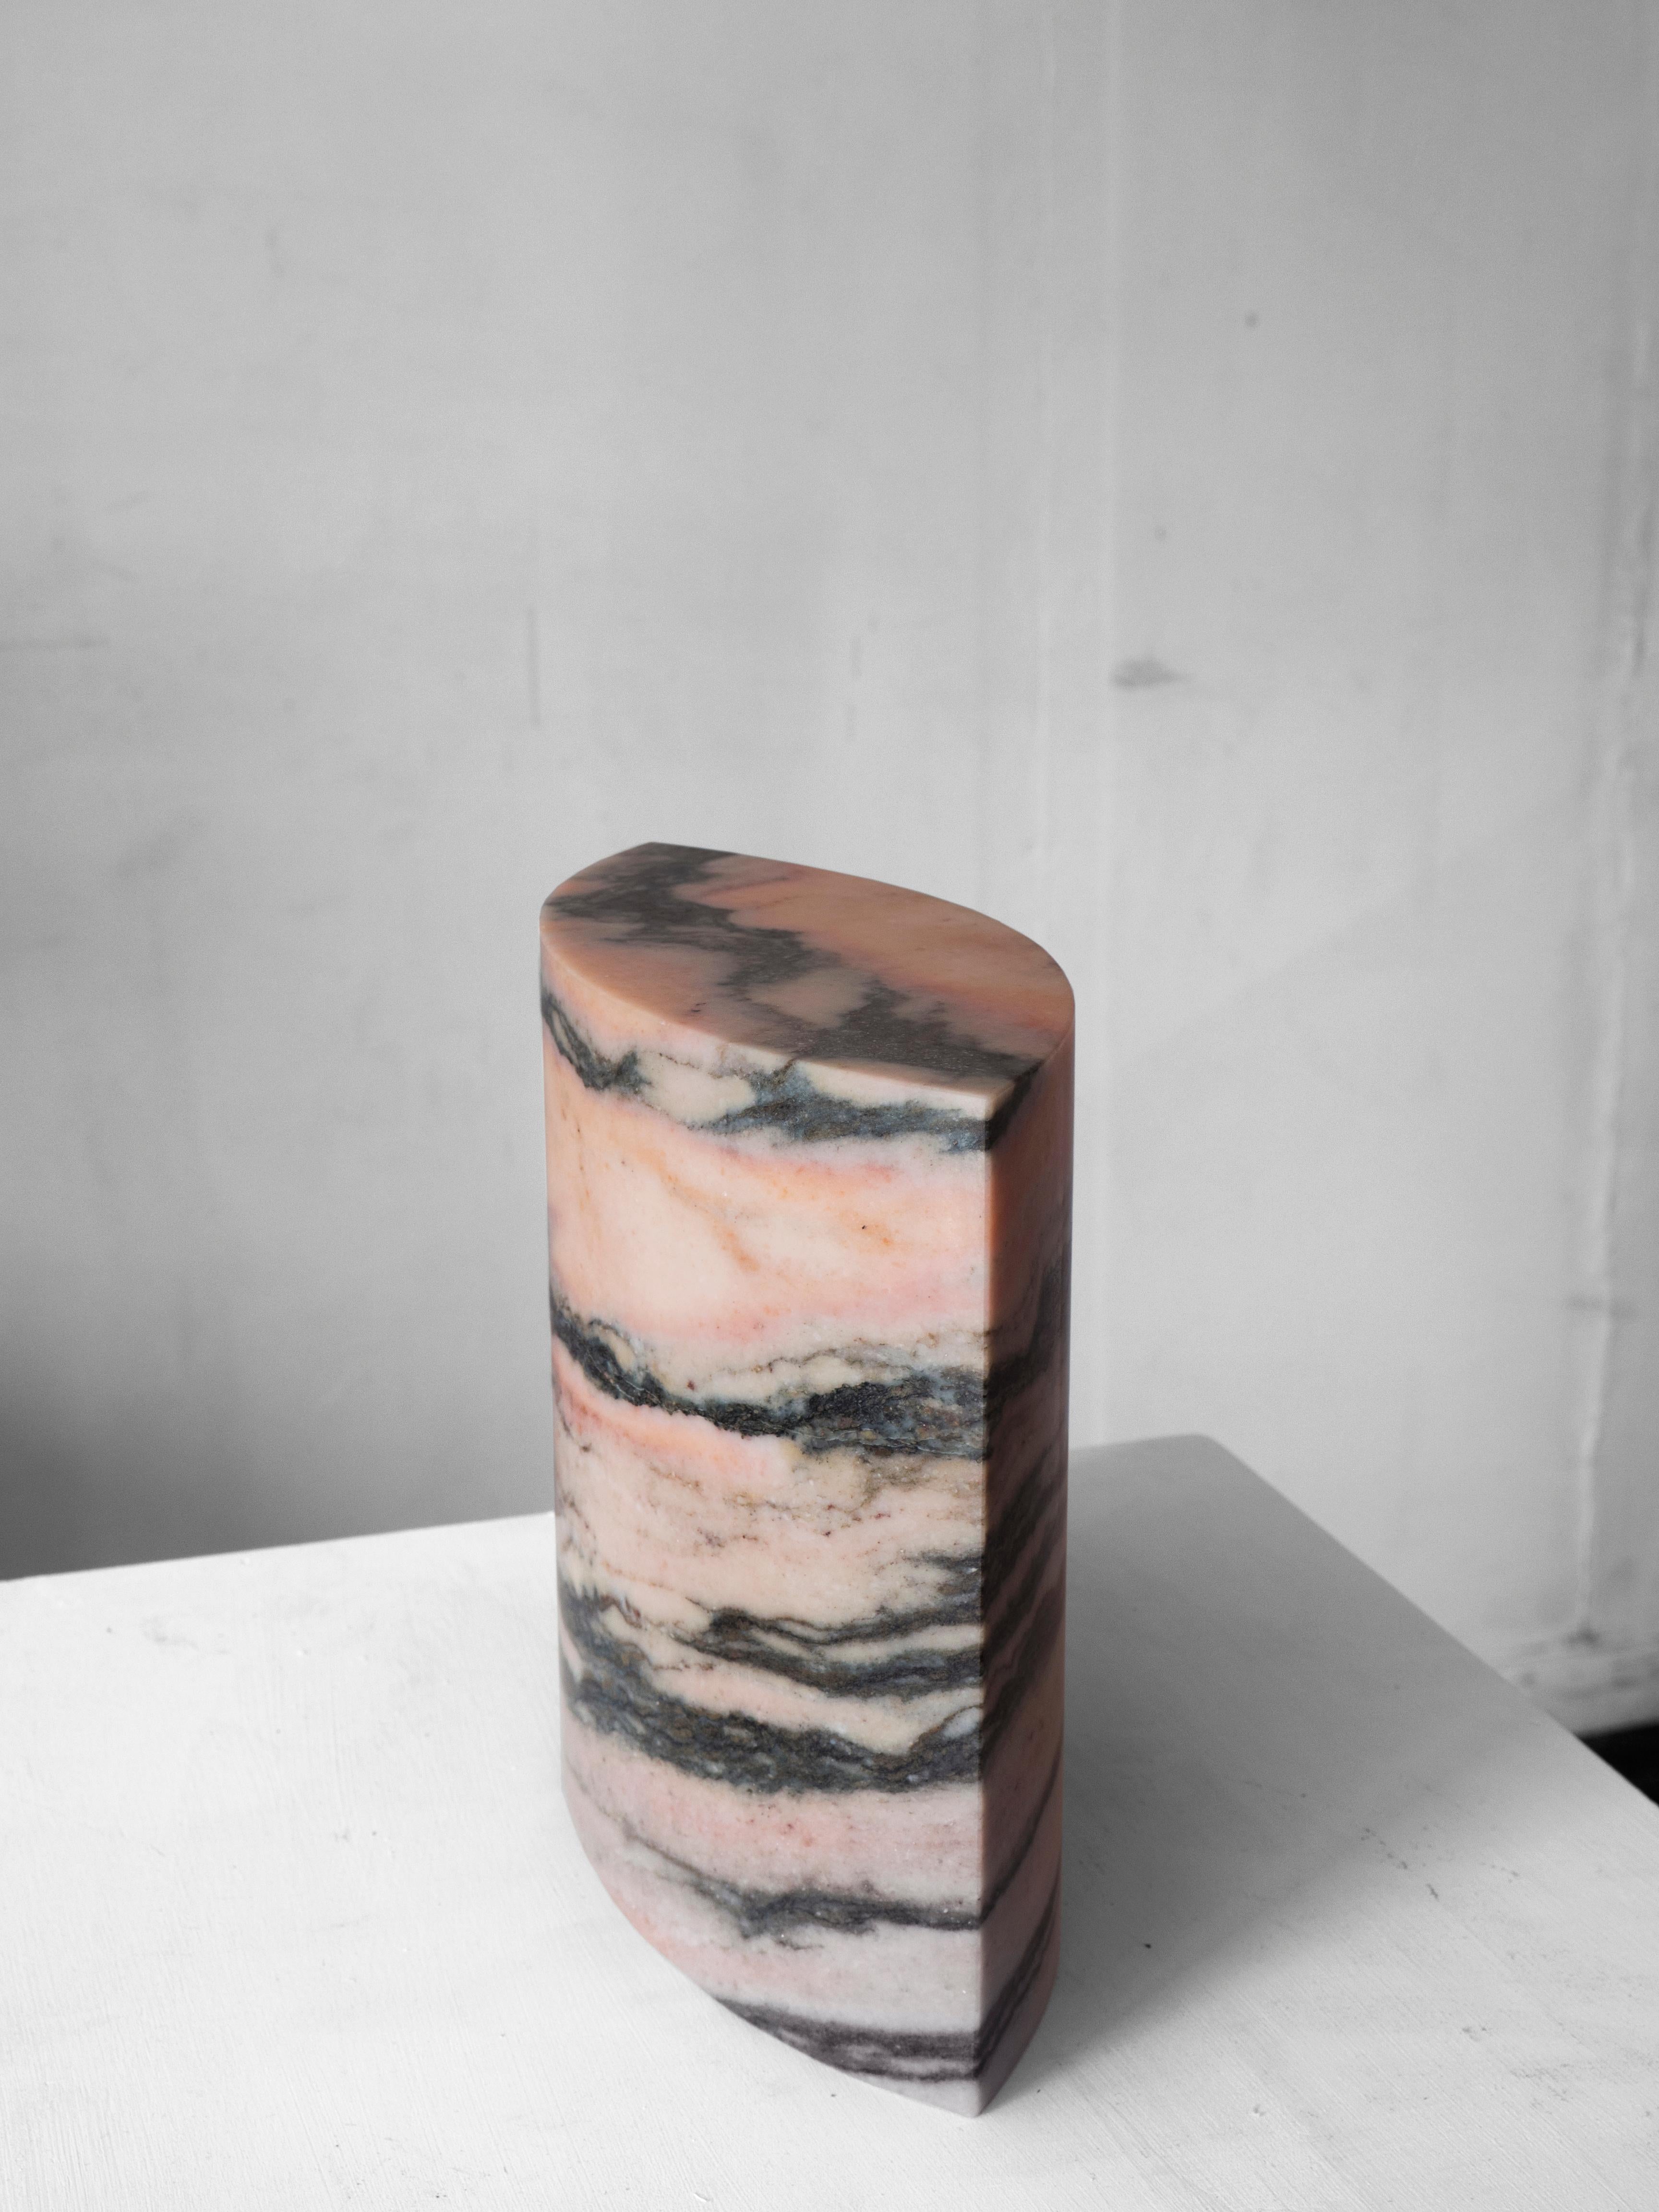 Information:
The sculpture is hand carved out of pink marble with black and gray shades. The stone’s natural character emerges through the contrasting softness and sharp lines. The surface is sanded and finished with a clear silky wax.

Material: